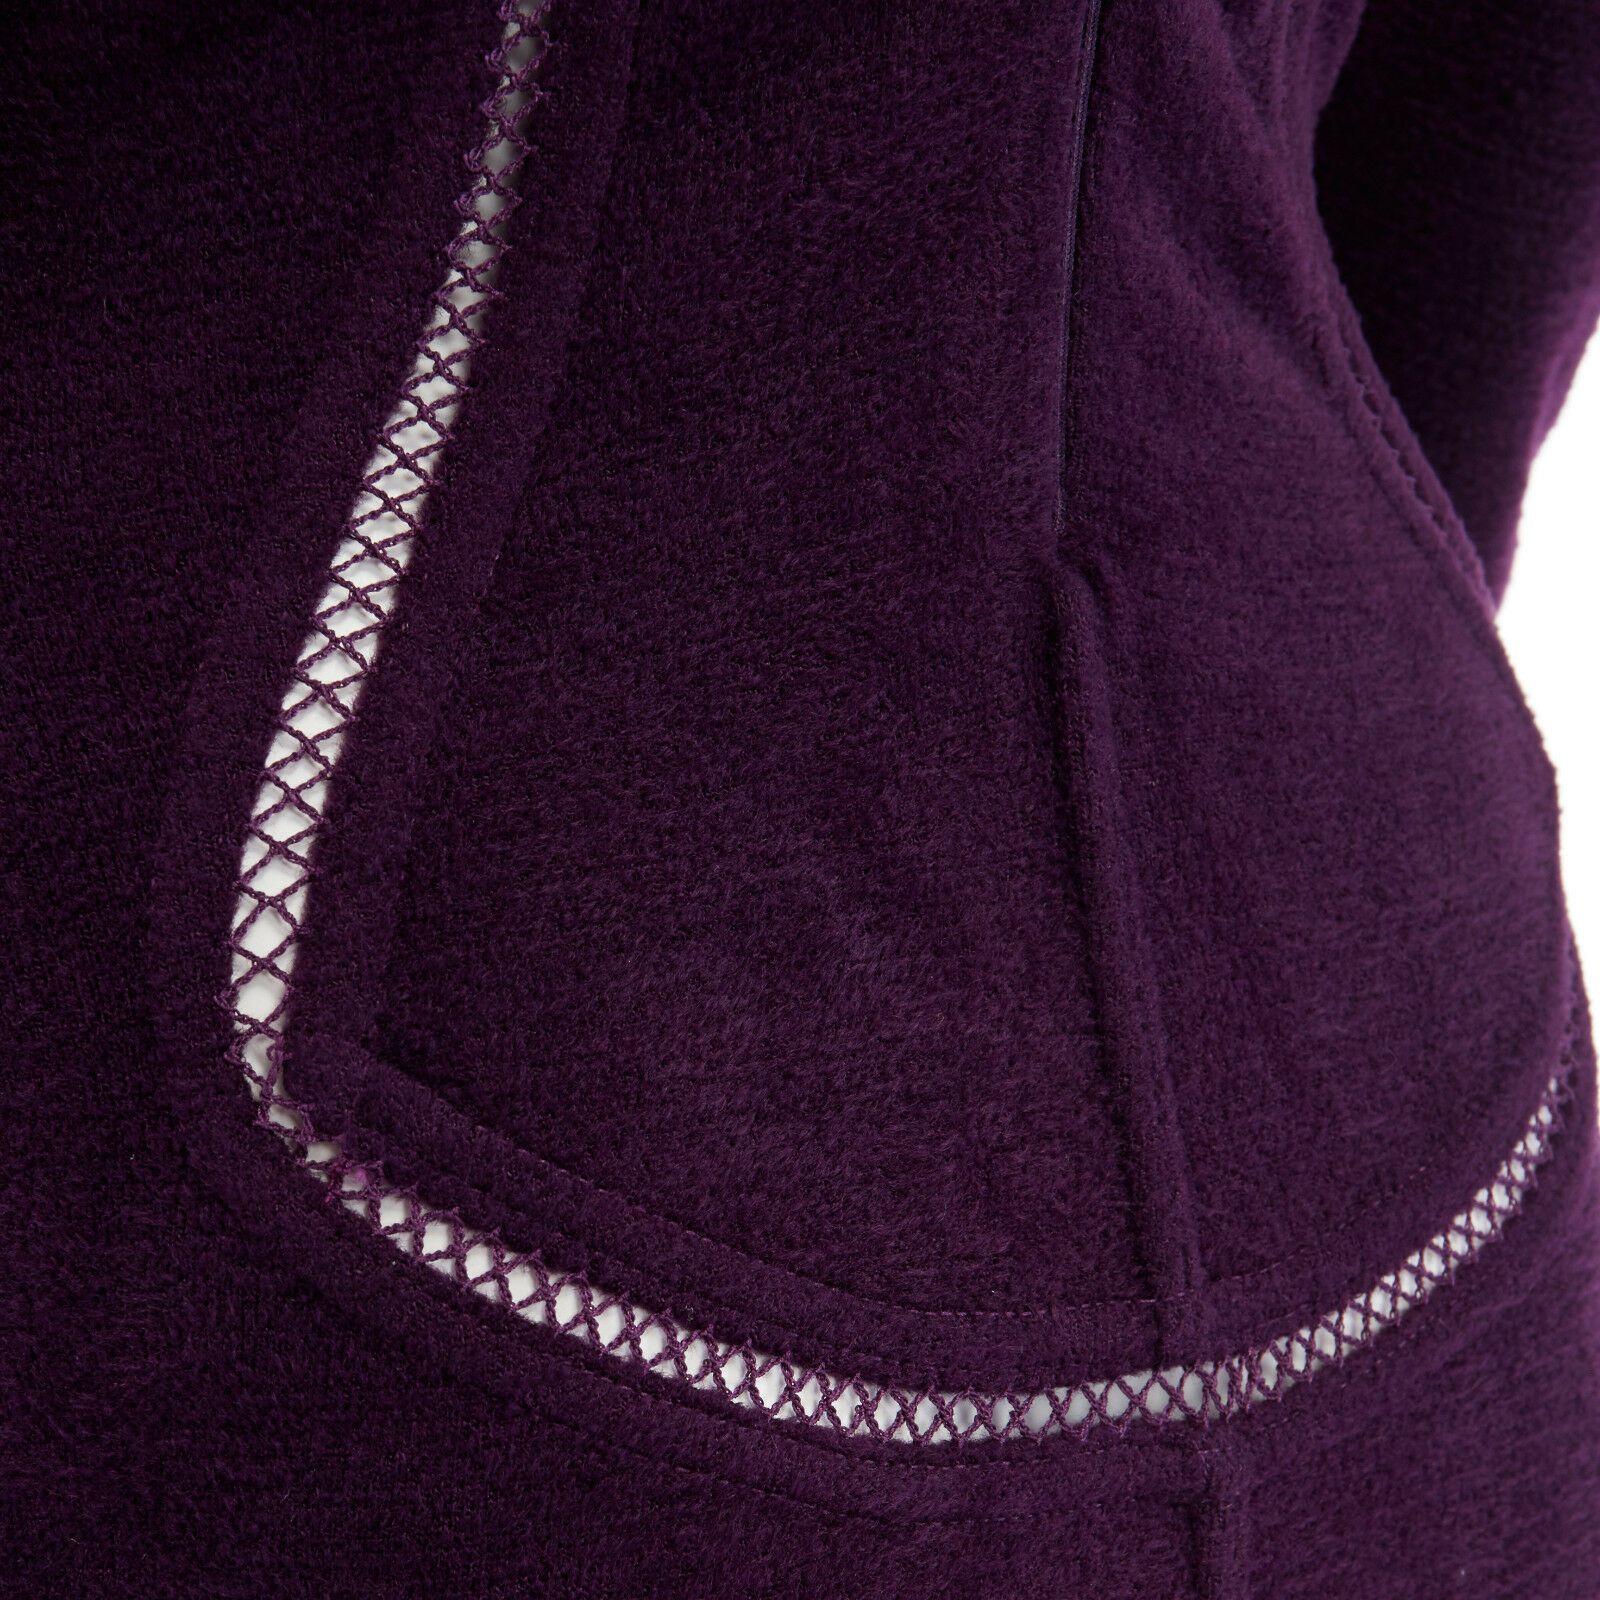 ALAIA Vintage purple chenille laddered seams bodycon stretch dress XS US2 UK8

AZZEDINE ALAIA VINTAGE
Viscose, polyamide, spandex . 
Purple . 
Laddering seam in body contouring 
streamline lines on front back . 
V-neckline . 
Long sleeves .